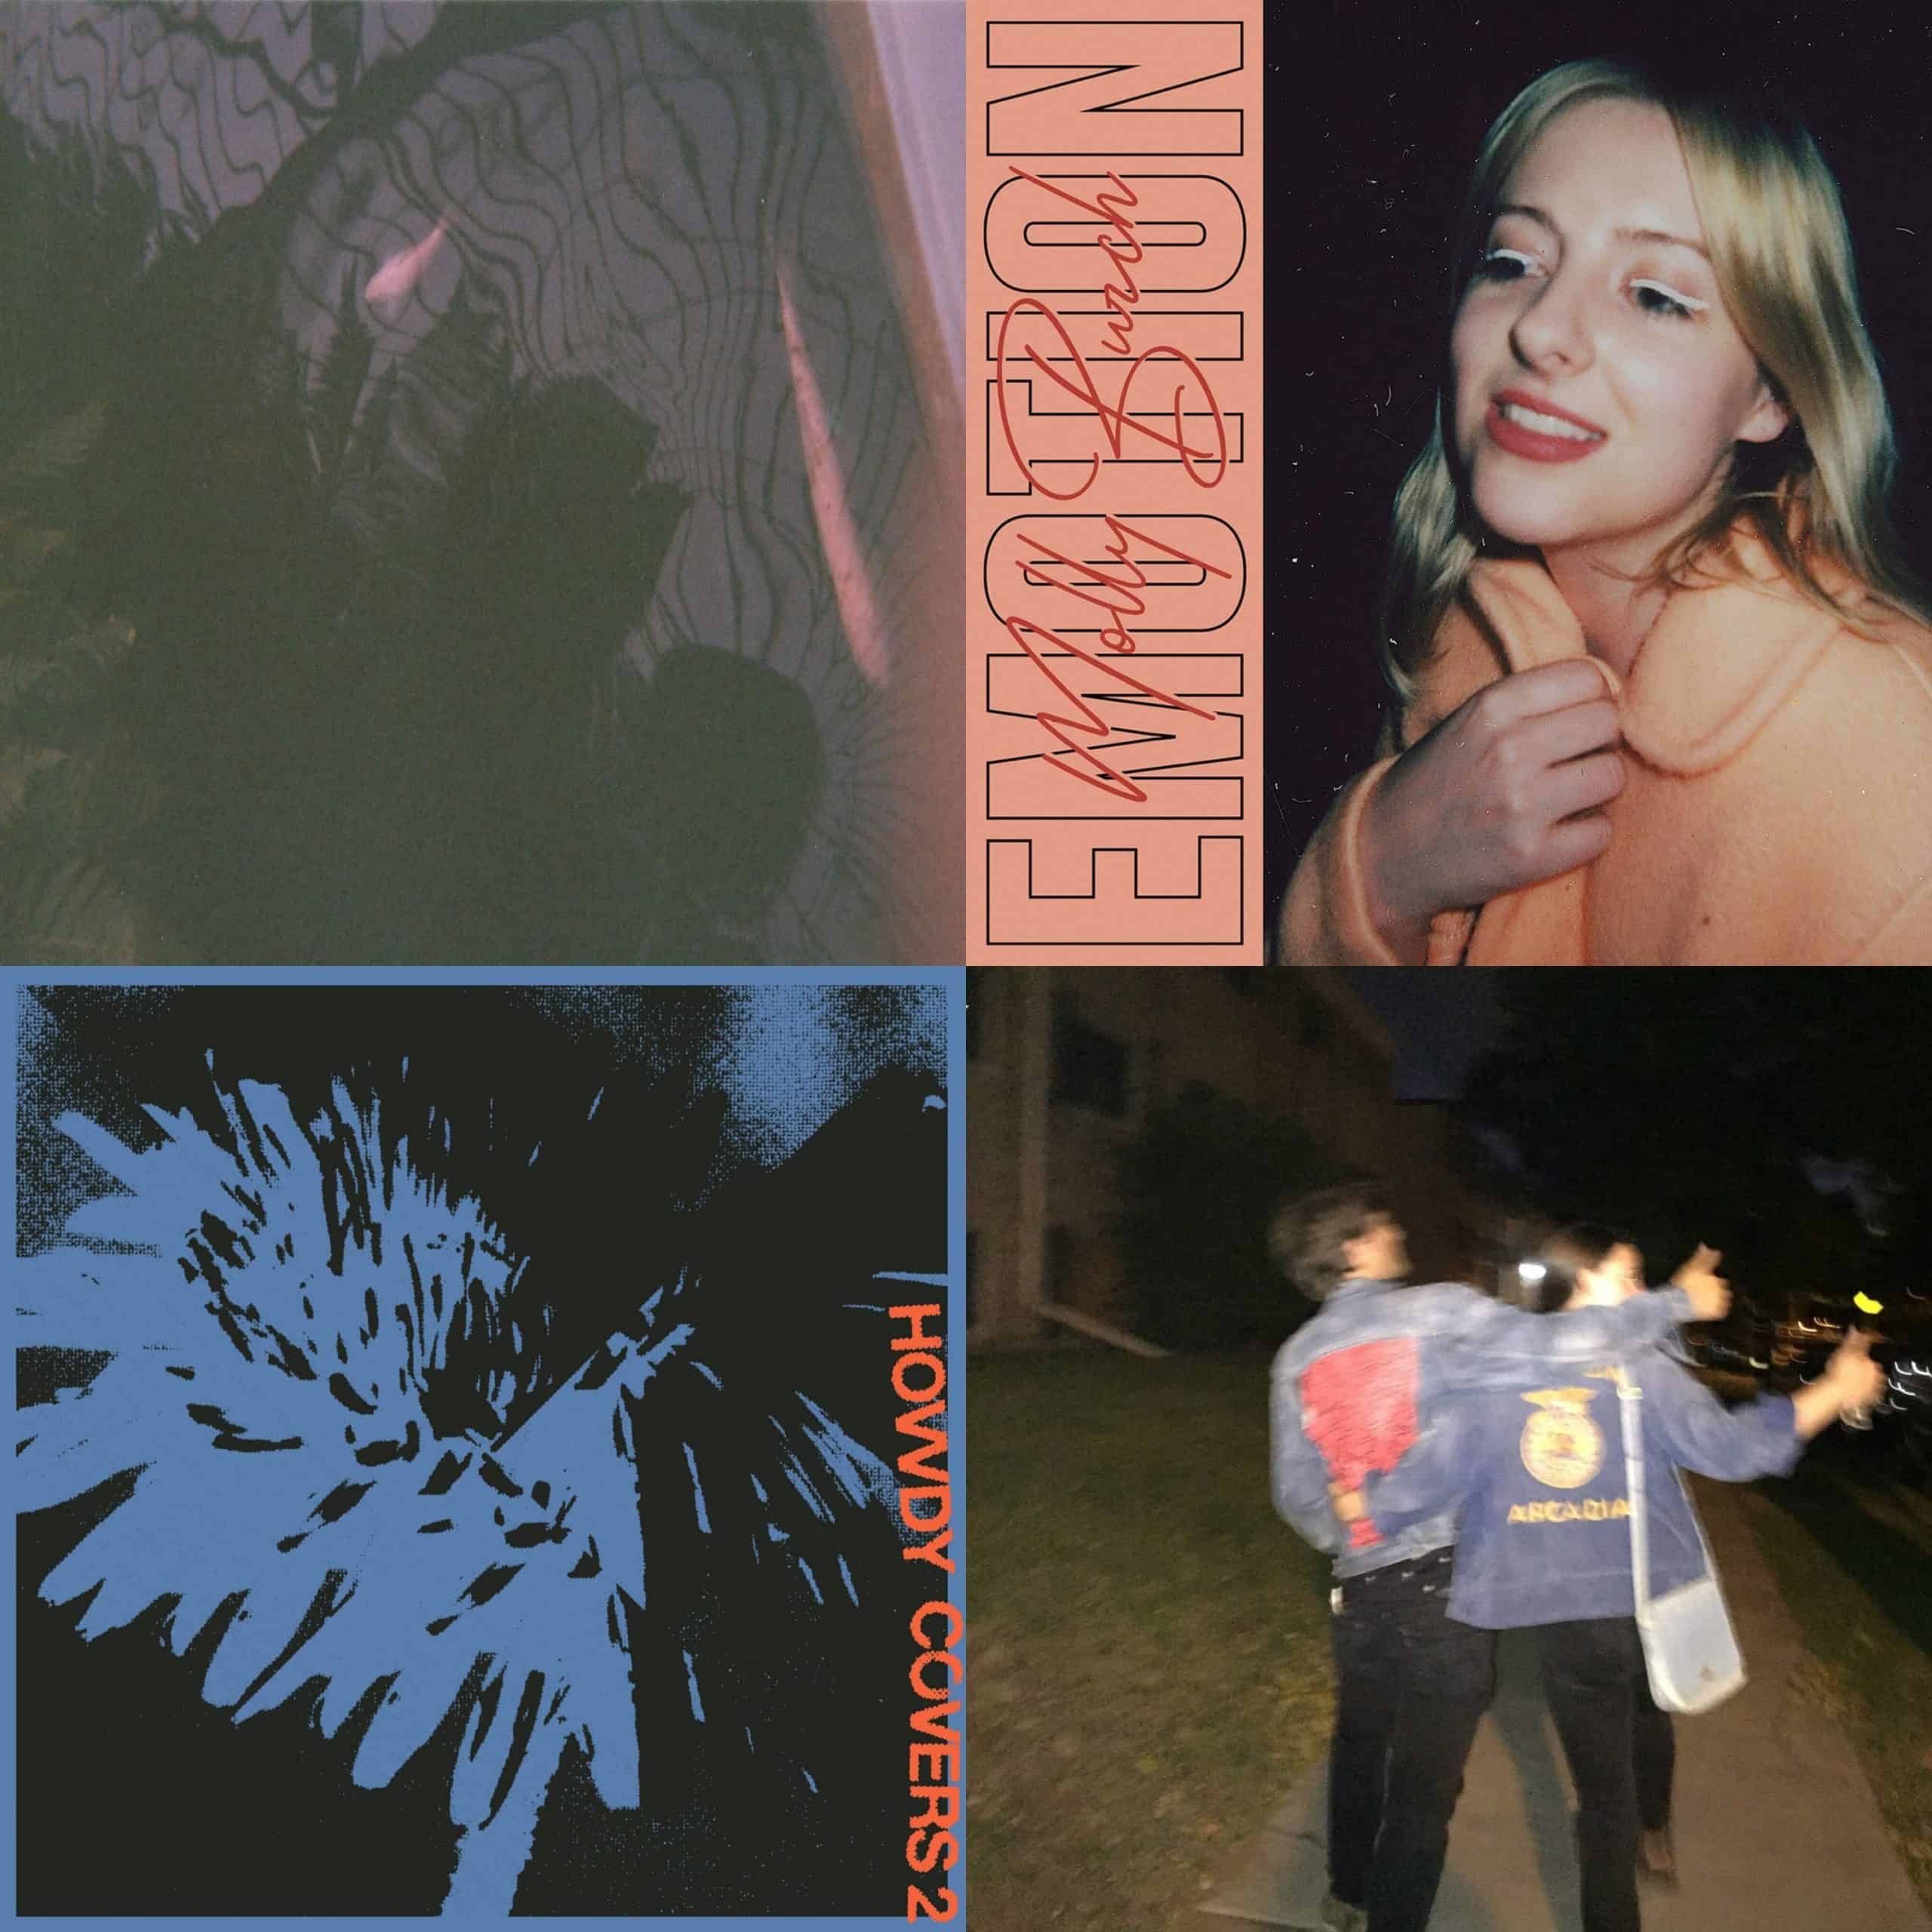 New Music from Cathedral Bells, Molly Burch, Hovvdy, and Aero Flynn